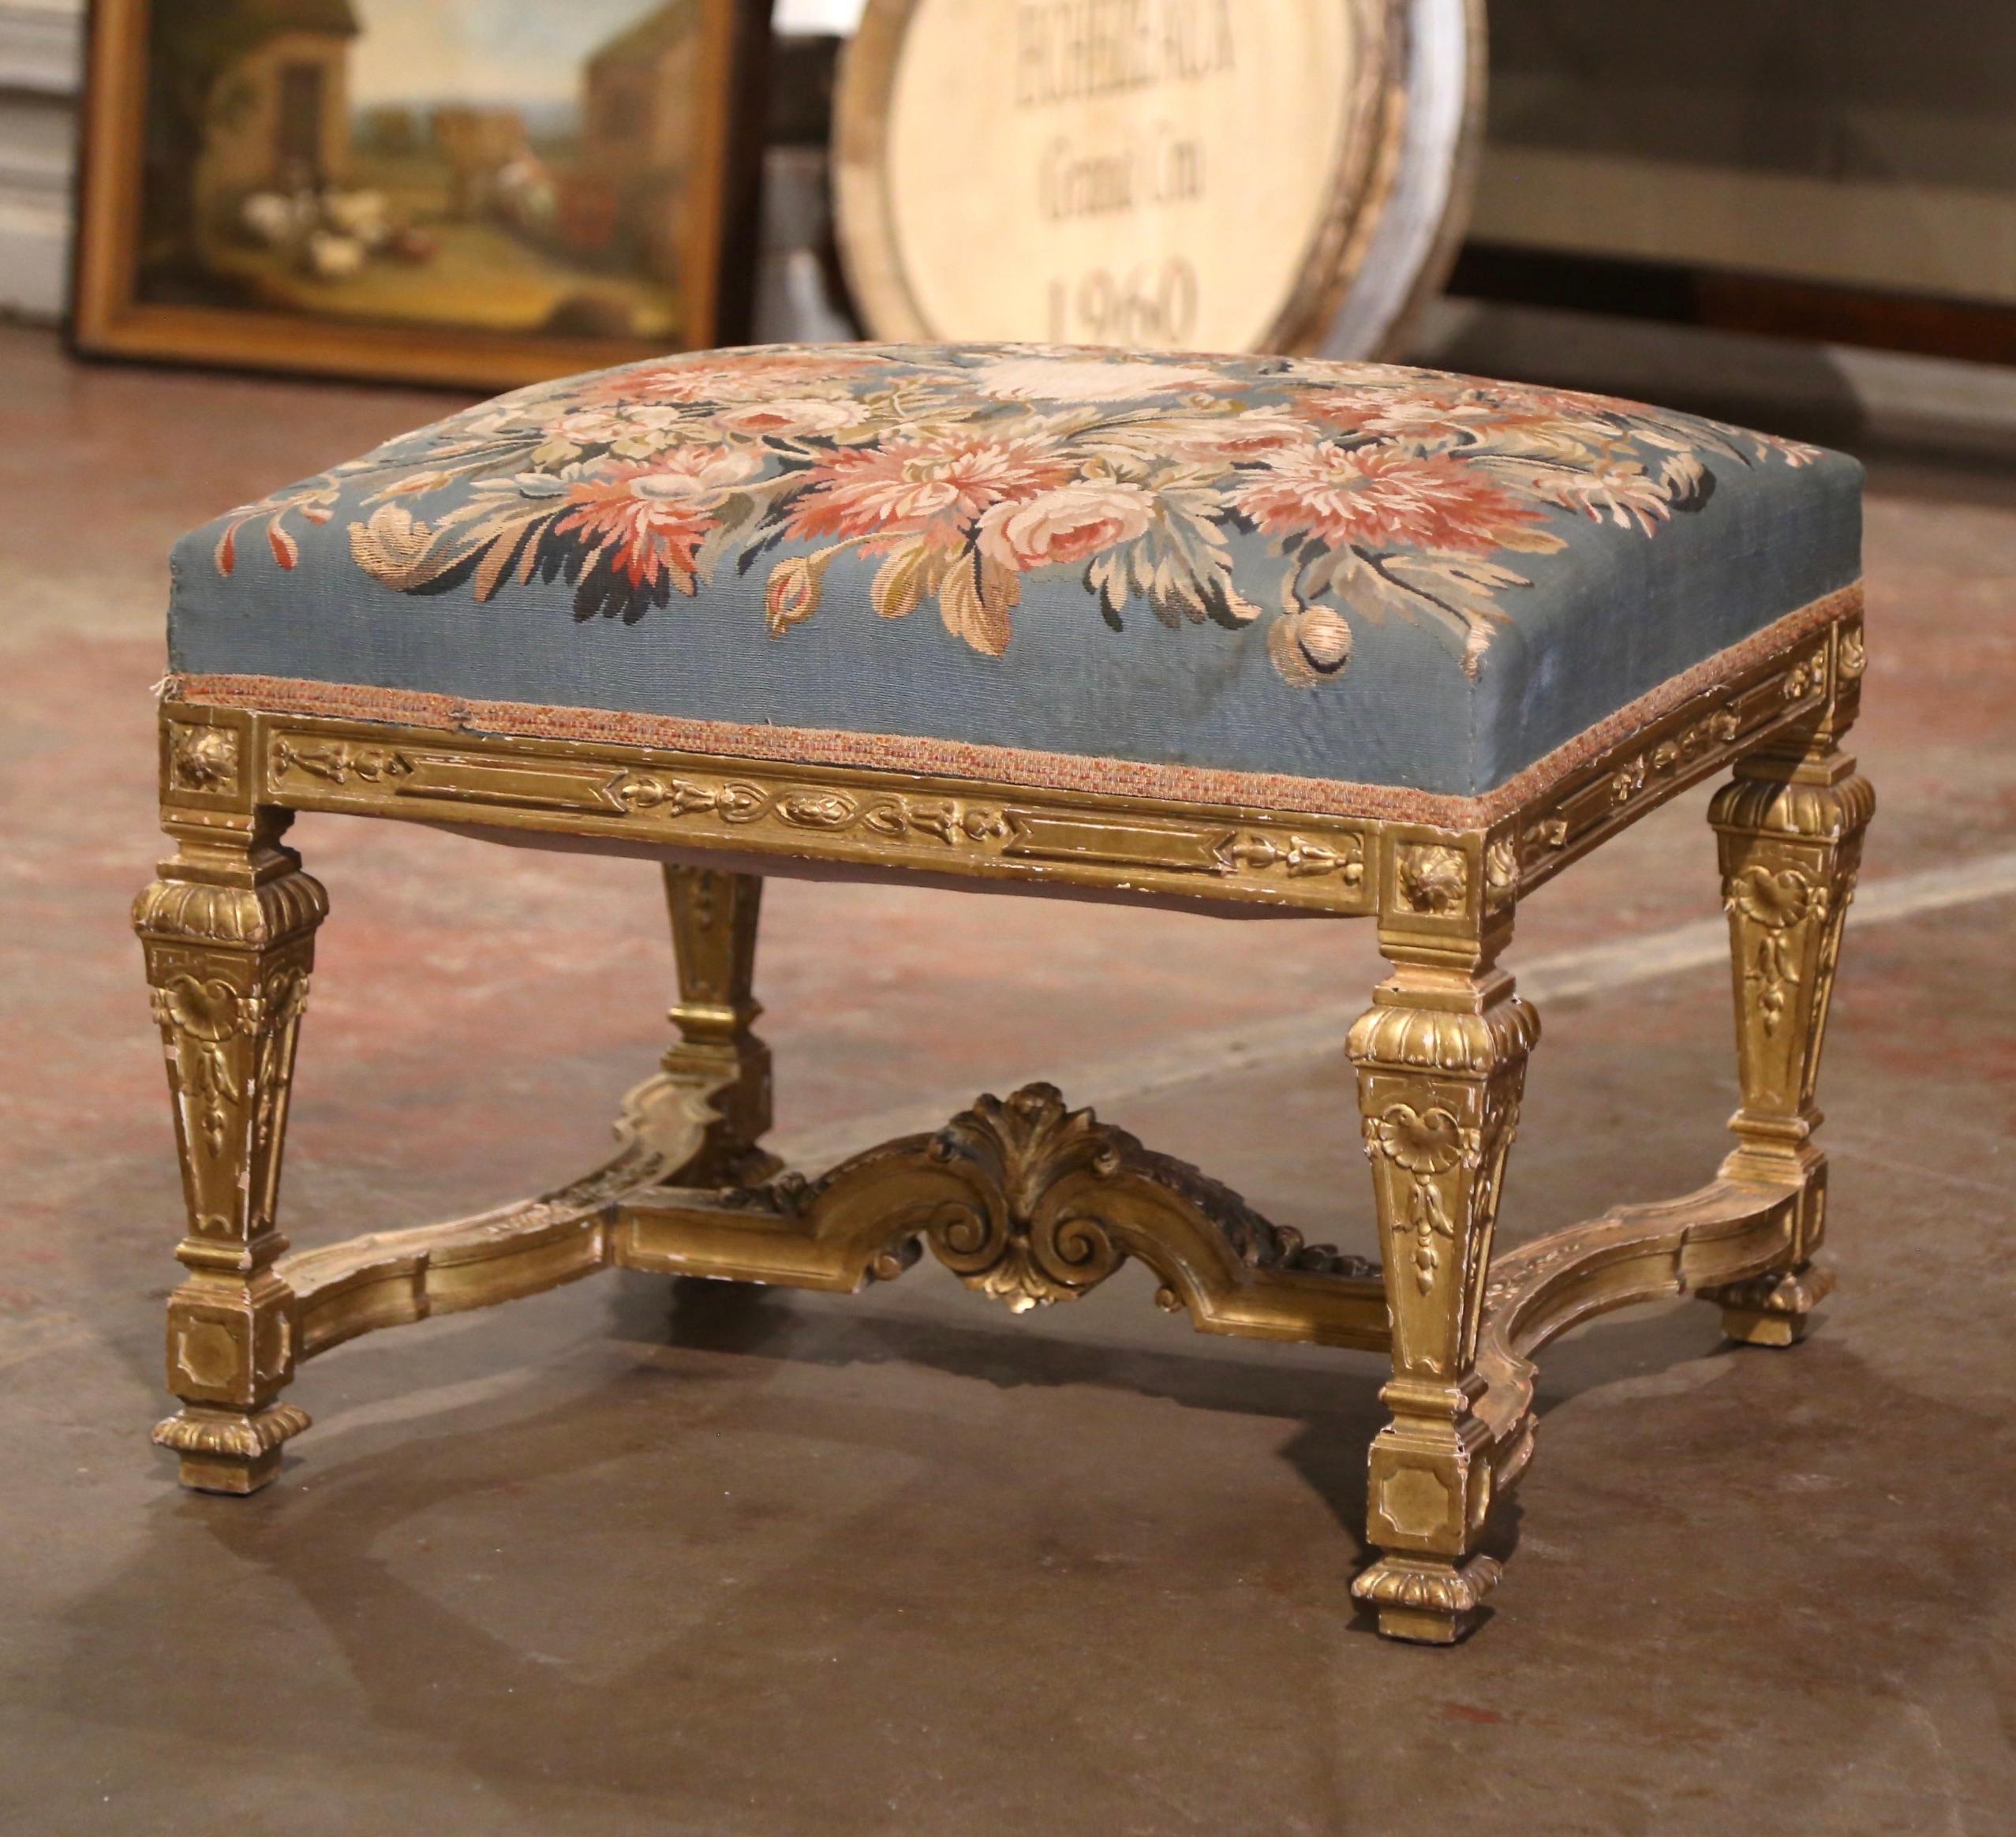 Decorate a den, living room or master bedroom with this elegant antique stool. Crafted in Versailles France circa 1870 and rectangular in shape, the elegant ottoman stands on tapered legs decorated with hand carved rosette medallions at the